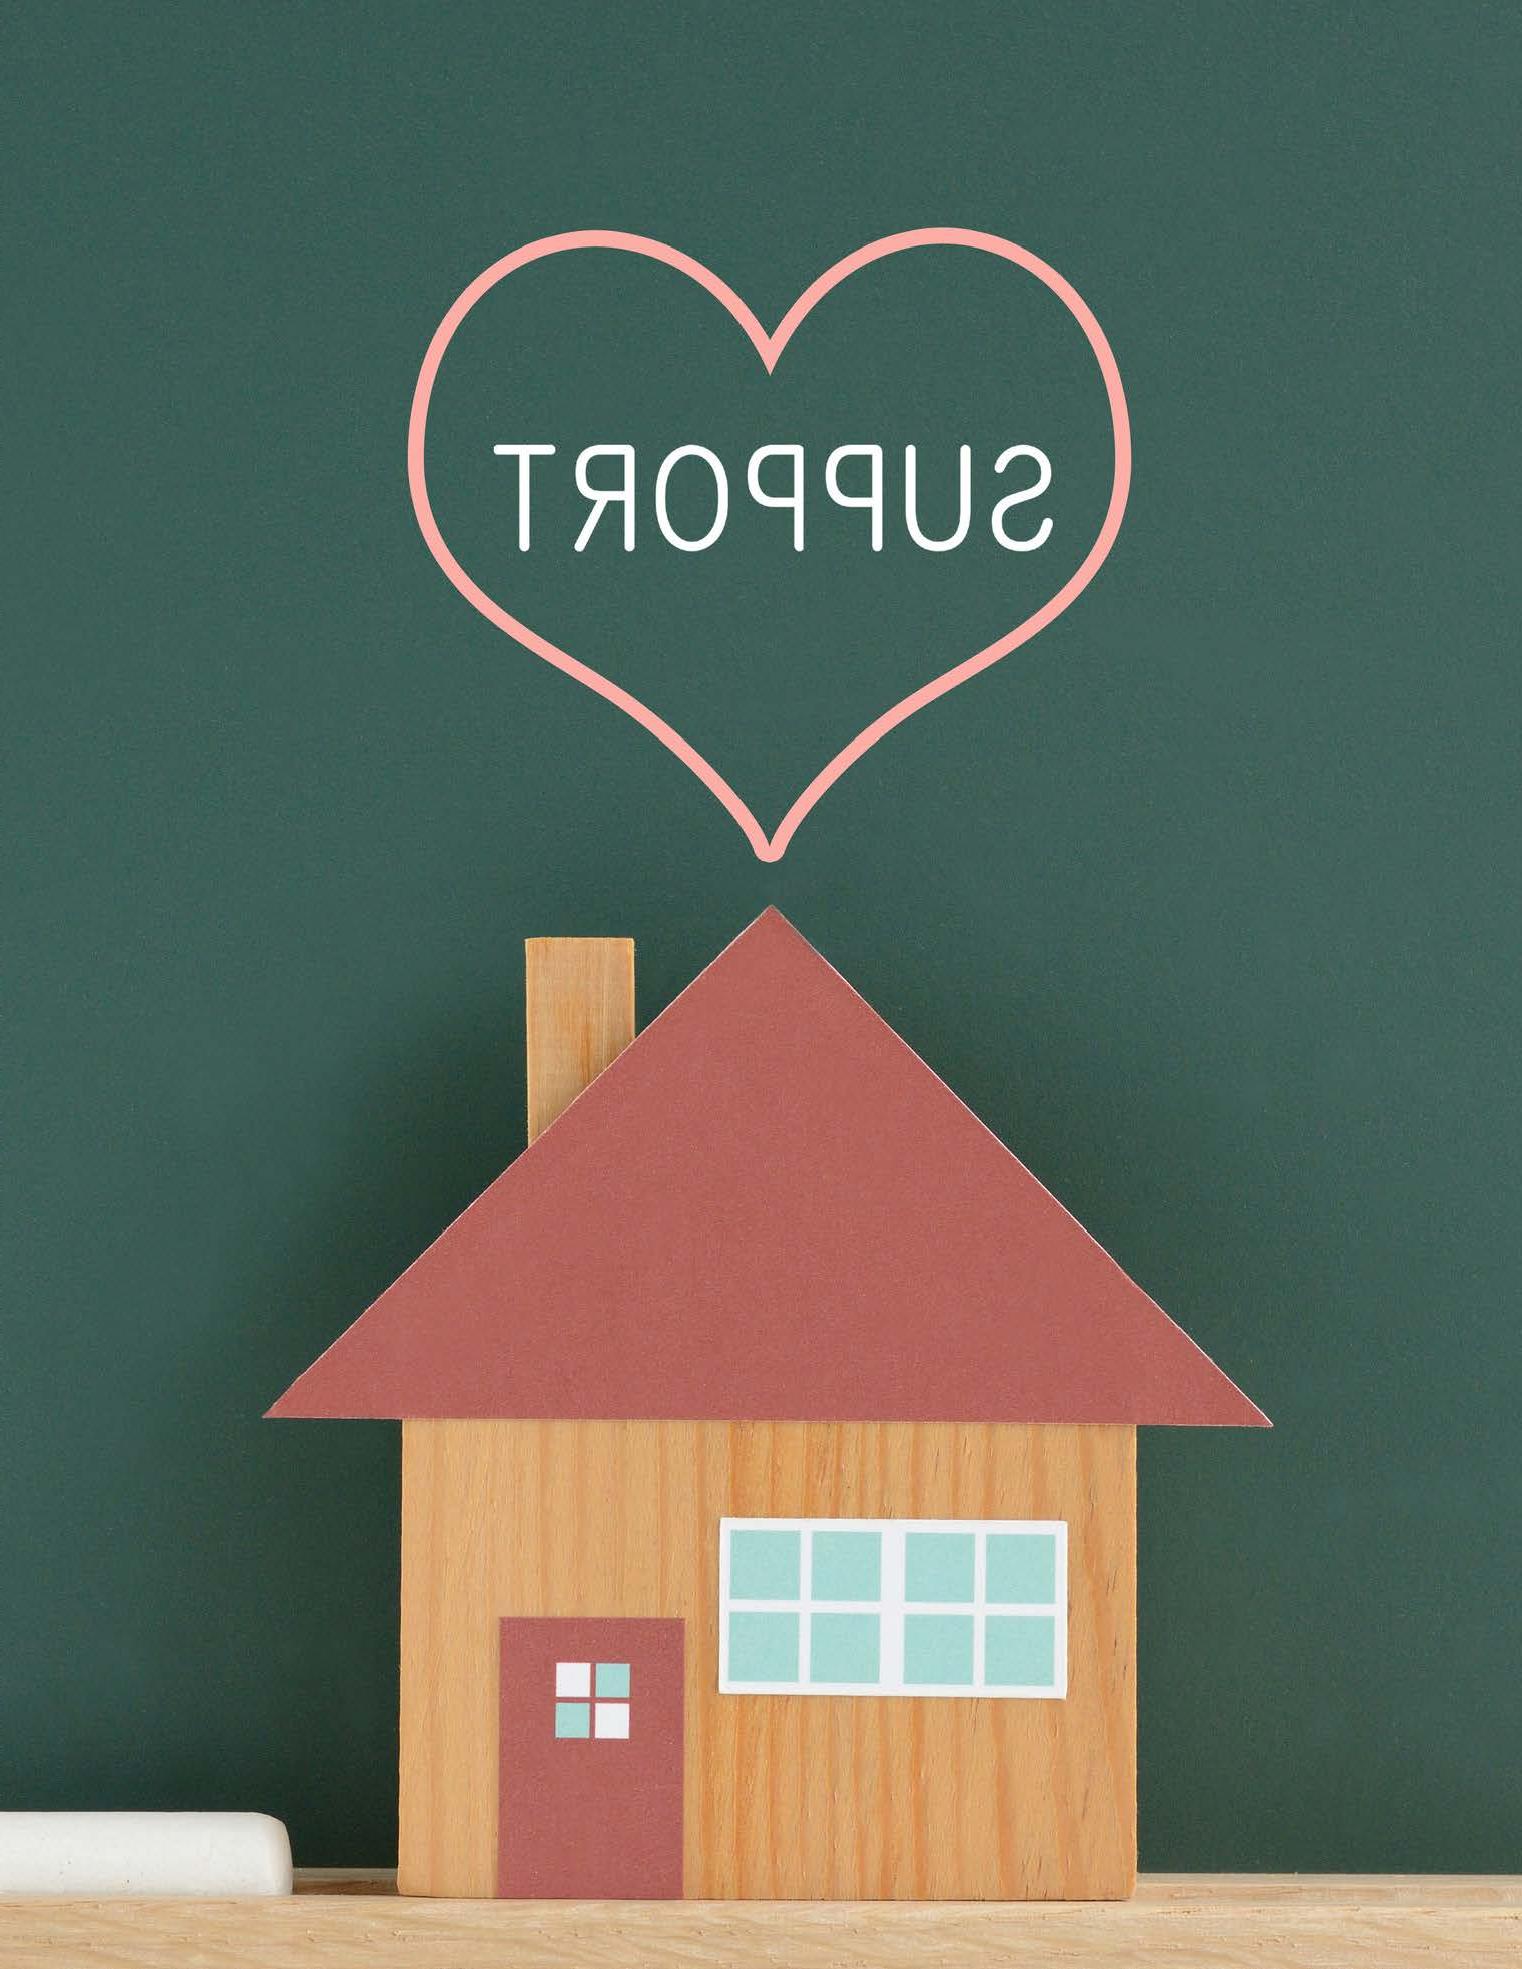 Graphic of a house with a heart above it with the text SUPPORT inside the heart.